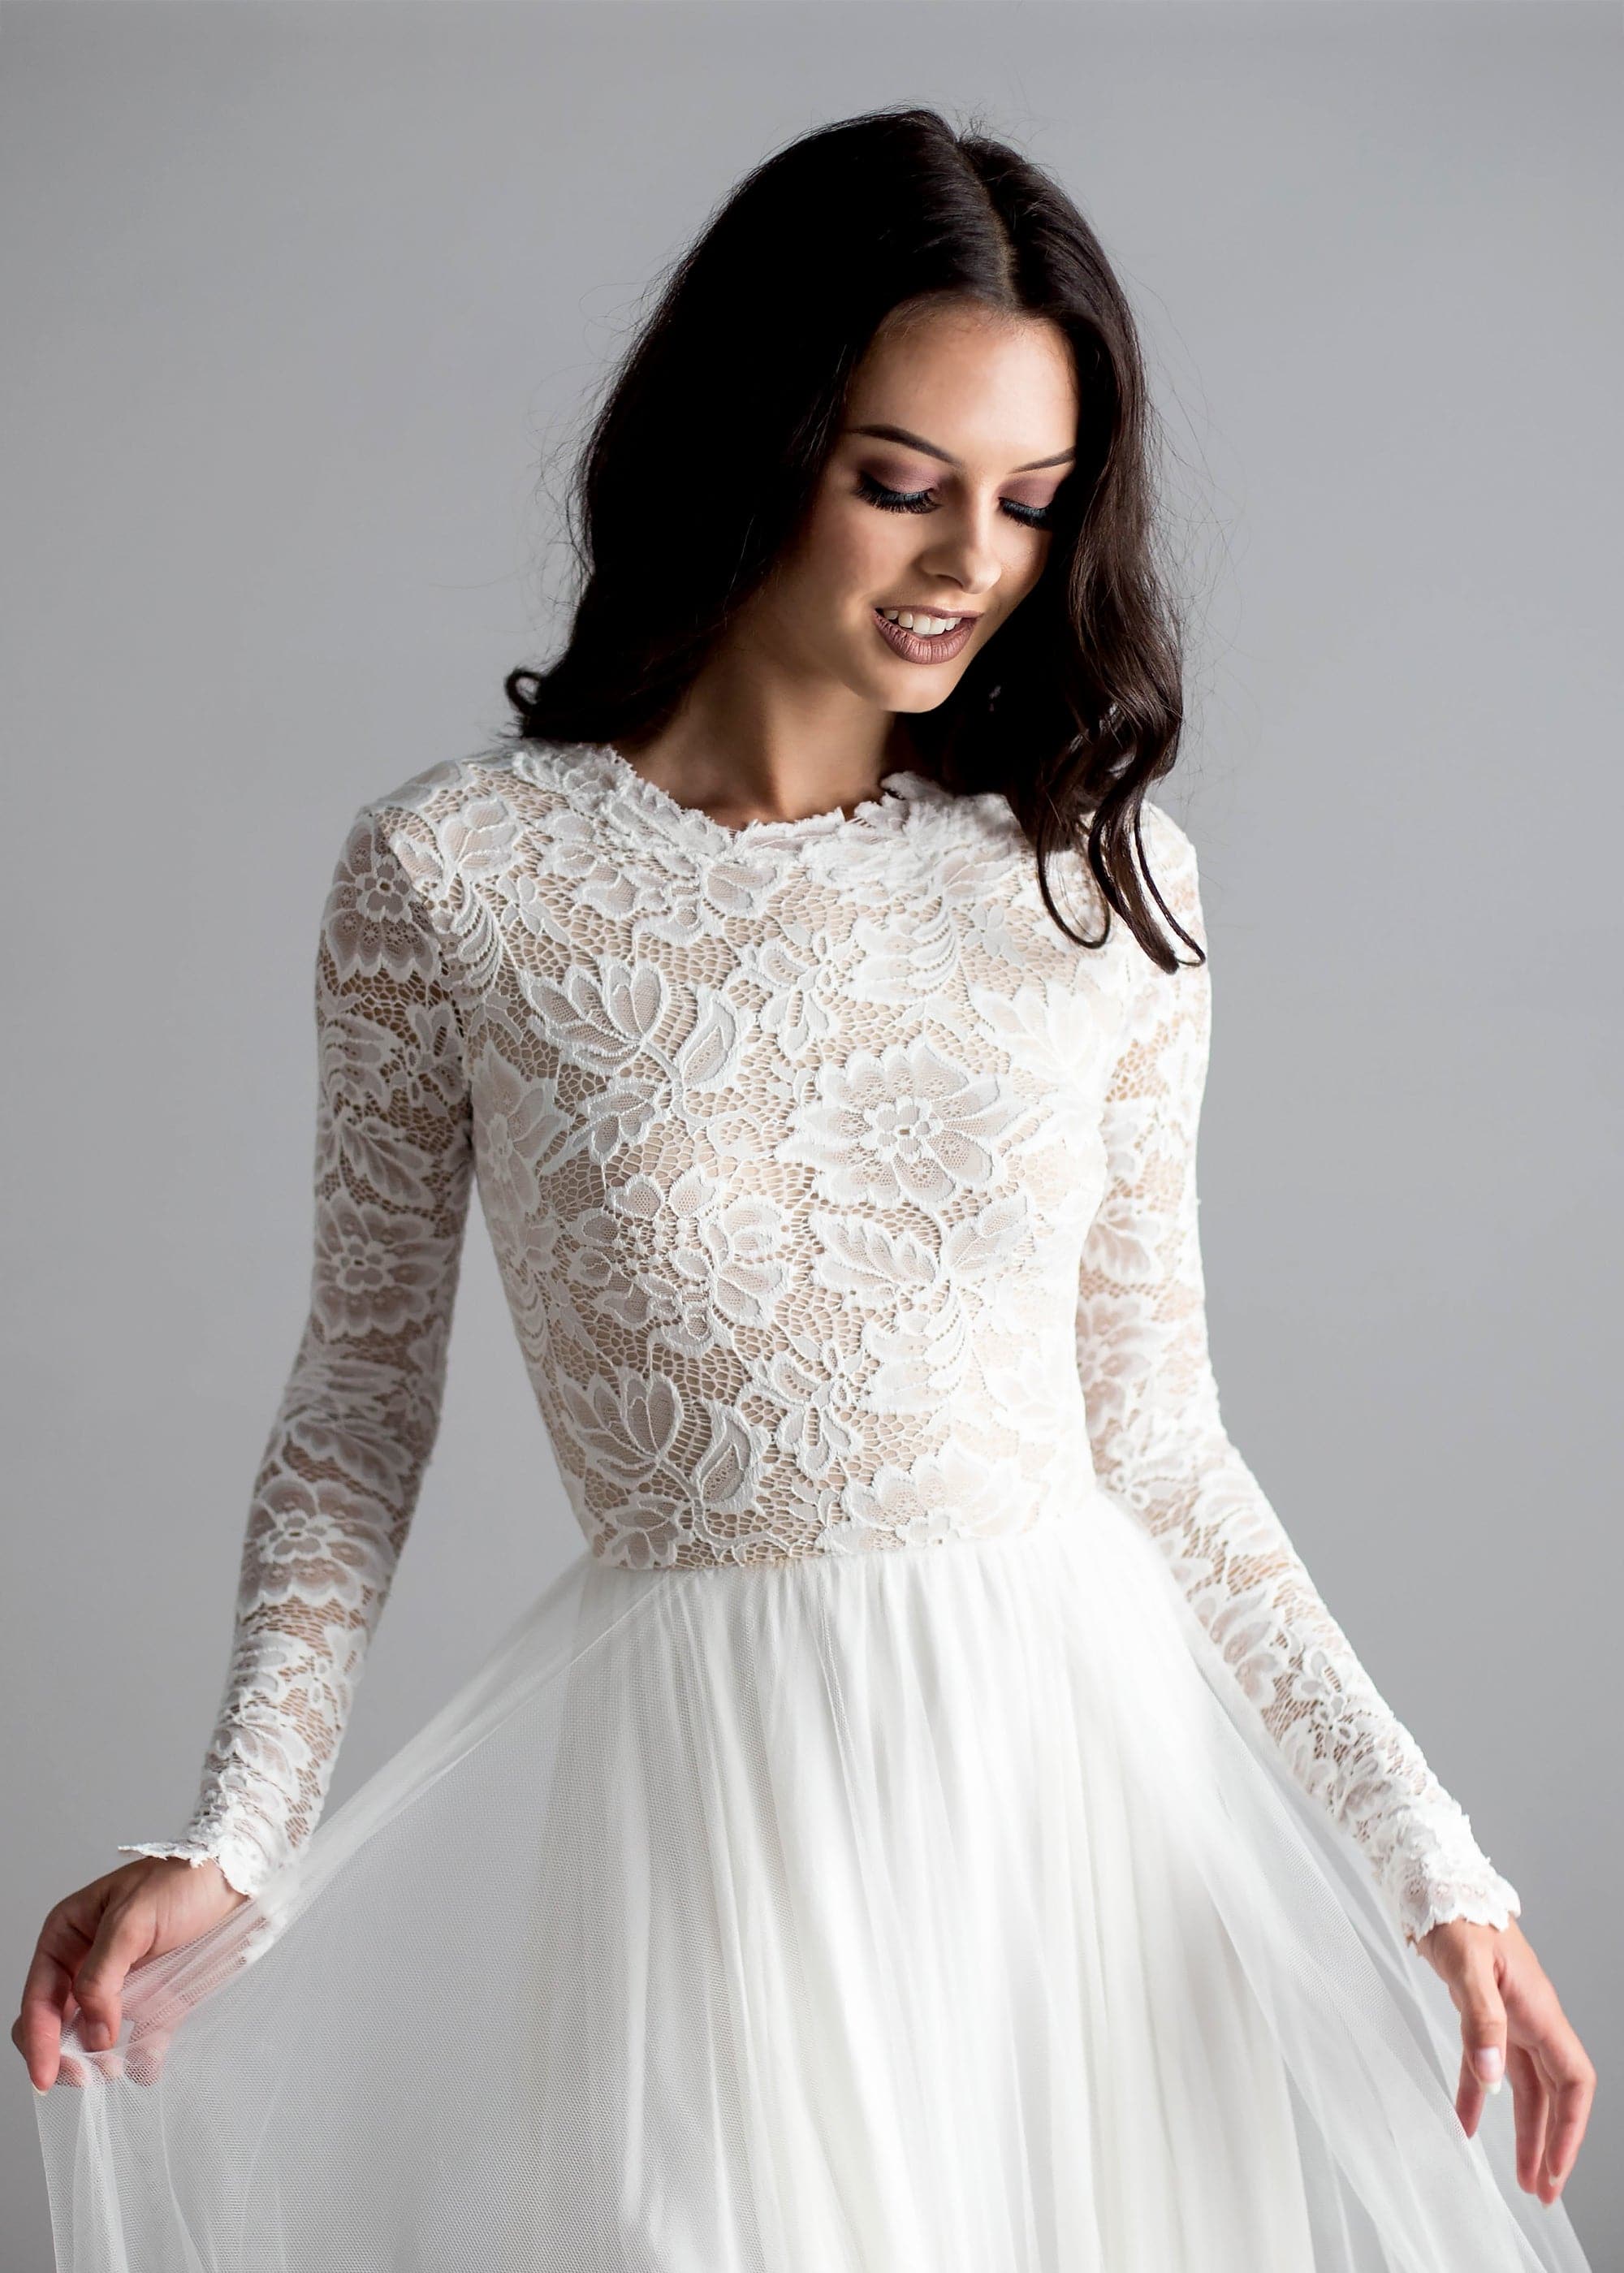 lace wedding top